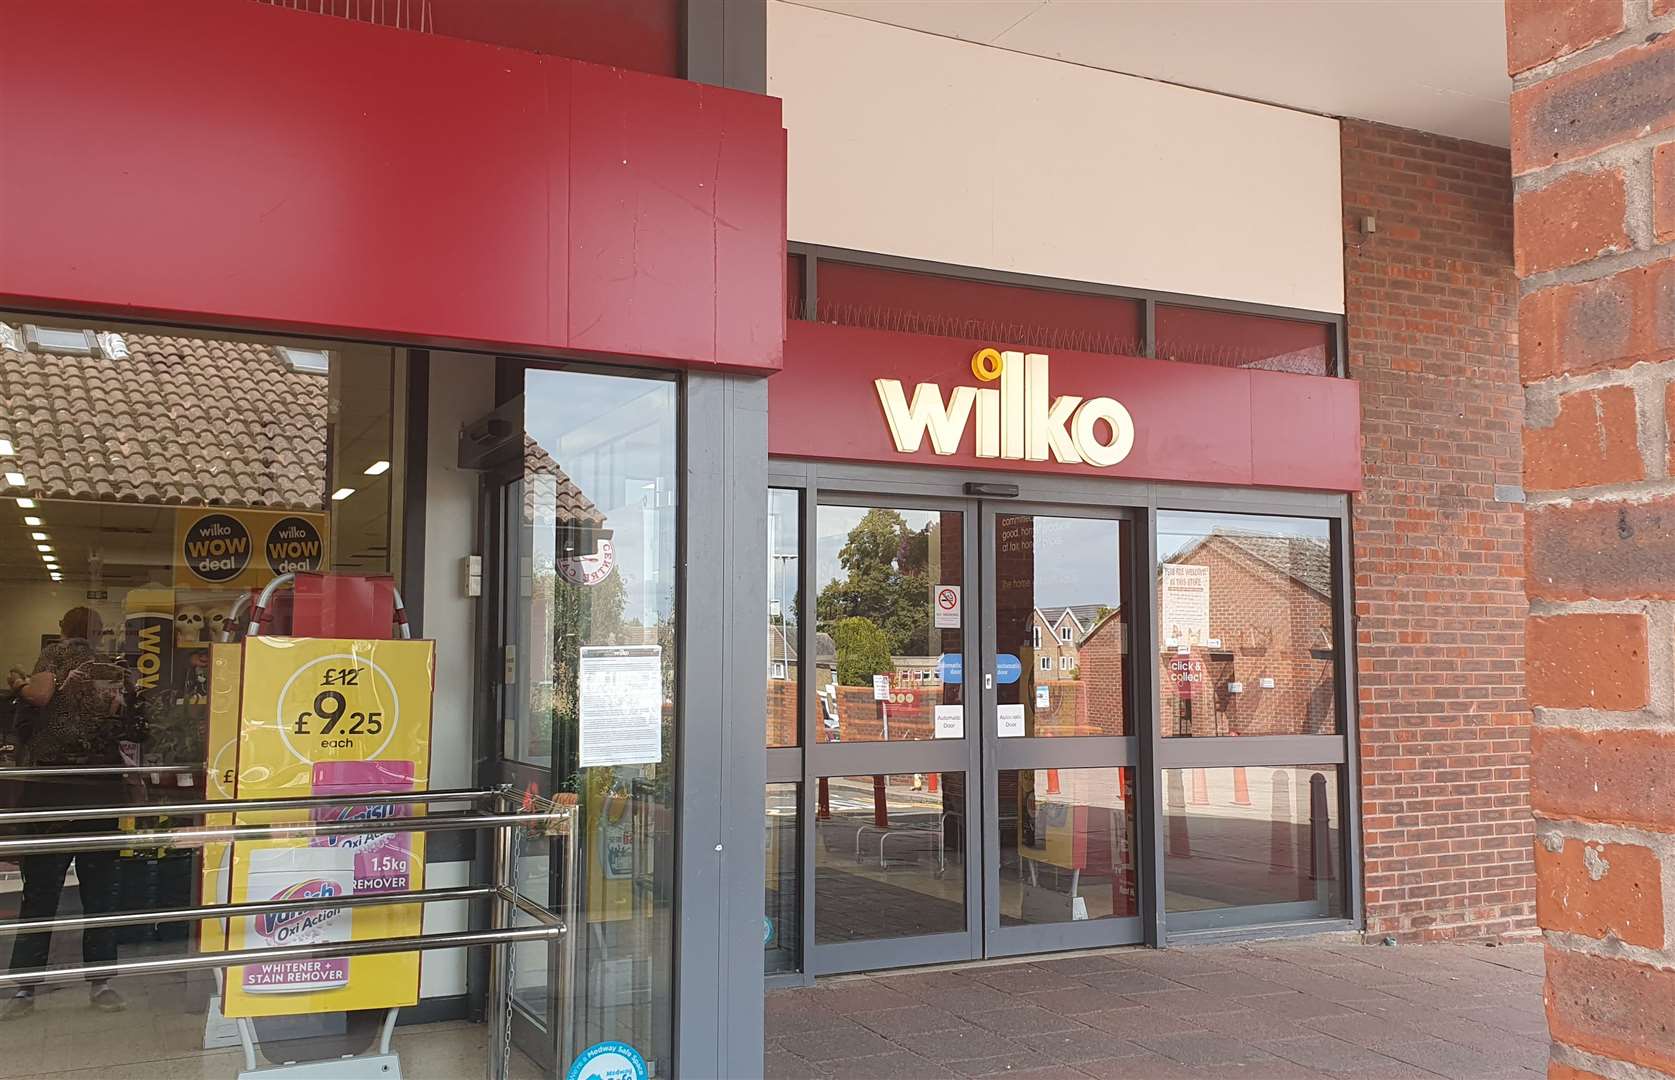 Wilko announced its administration sale this month after failing to secure emergency funding